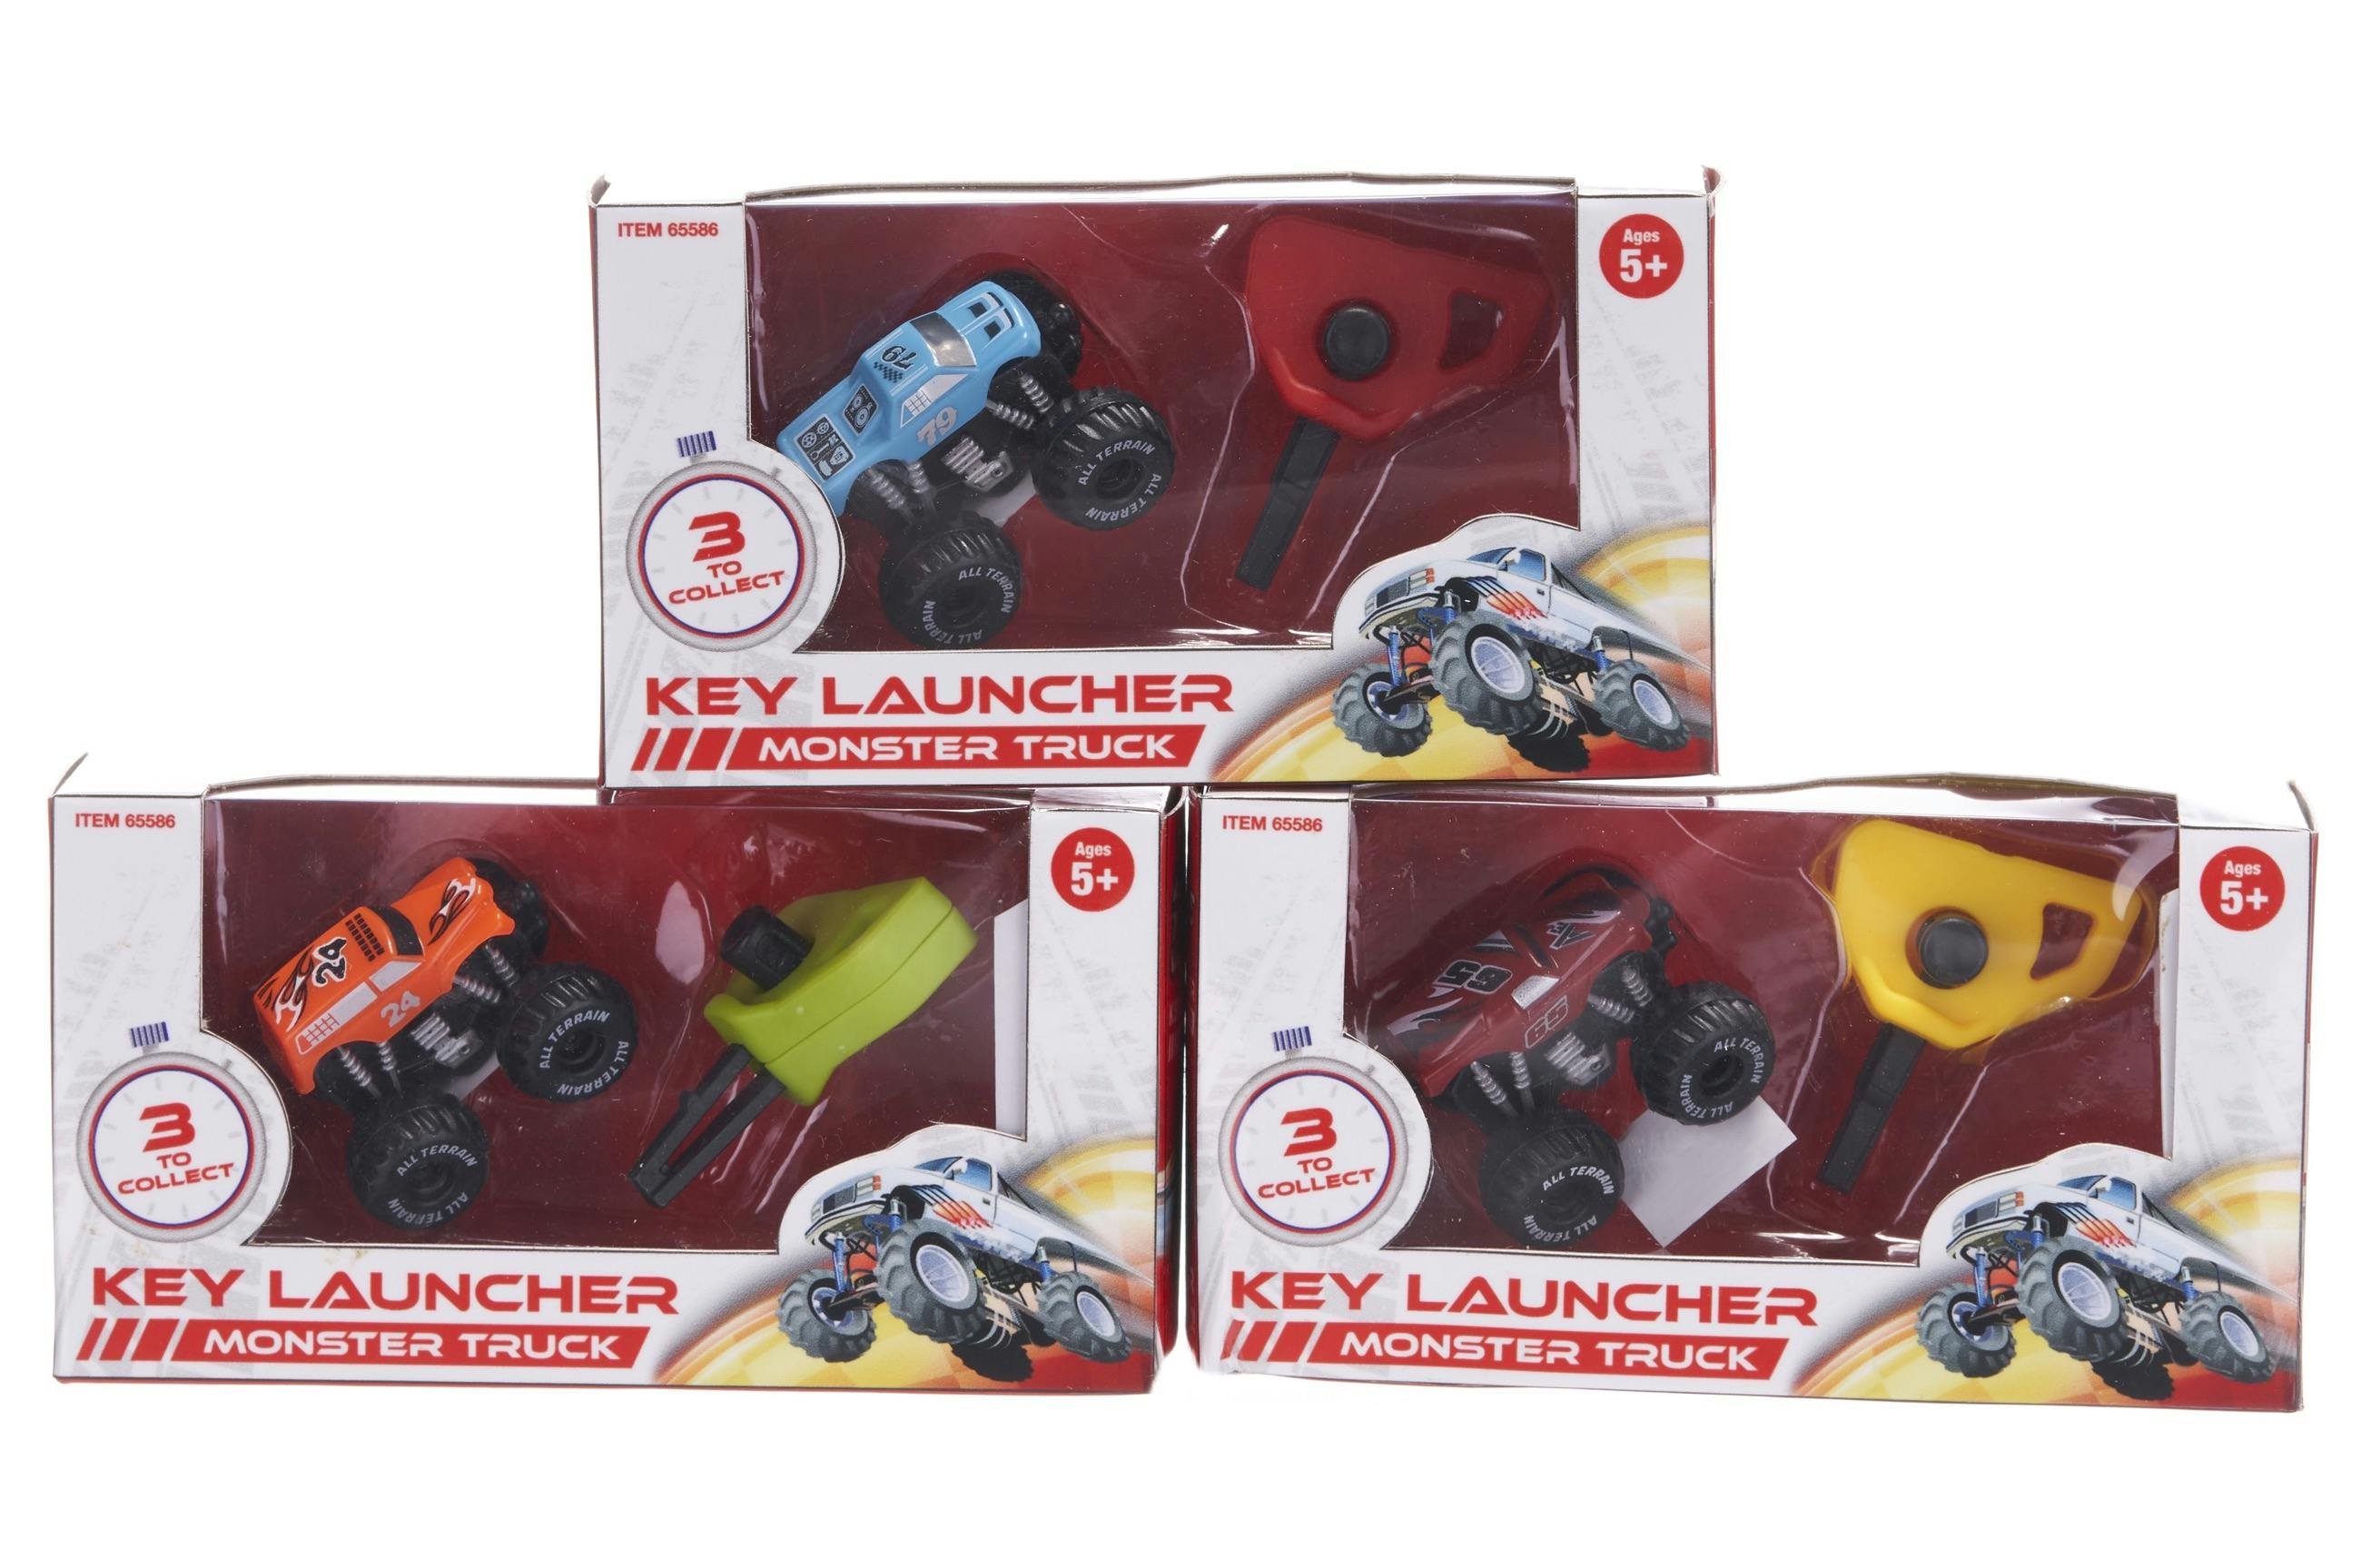 Product - Mini Monster Truck and Launch key